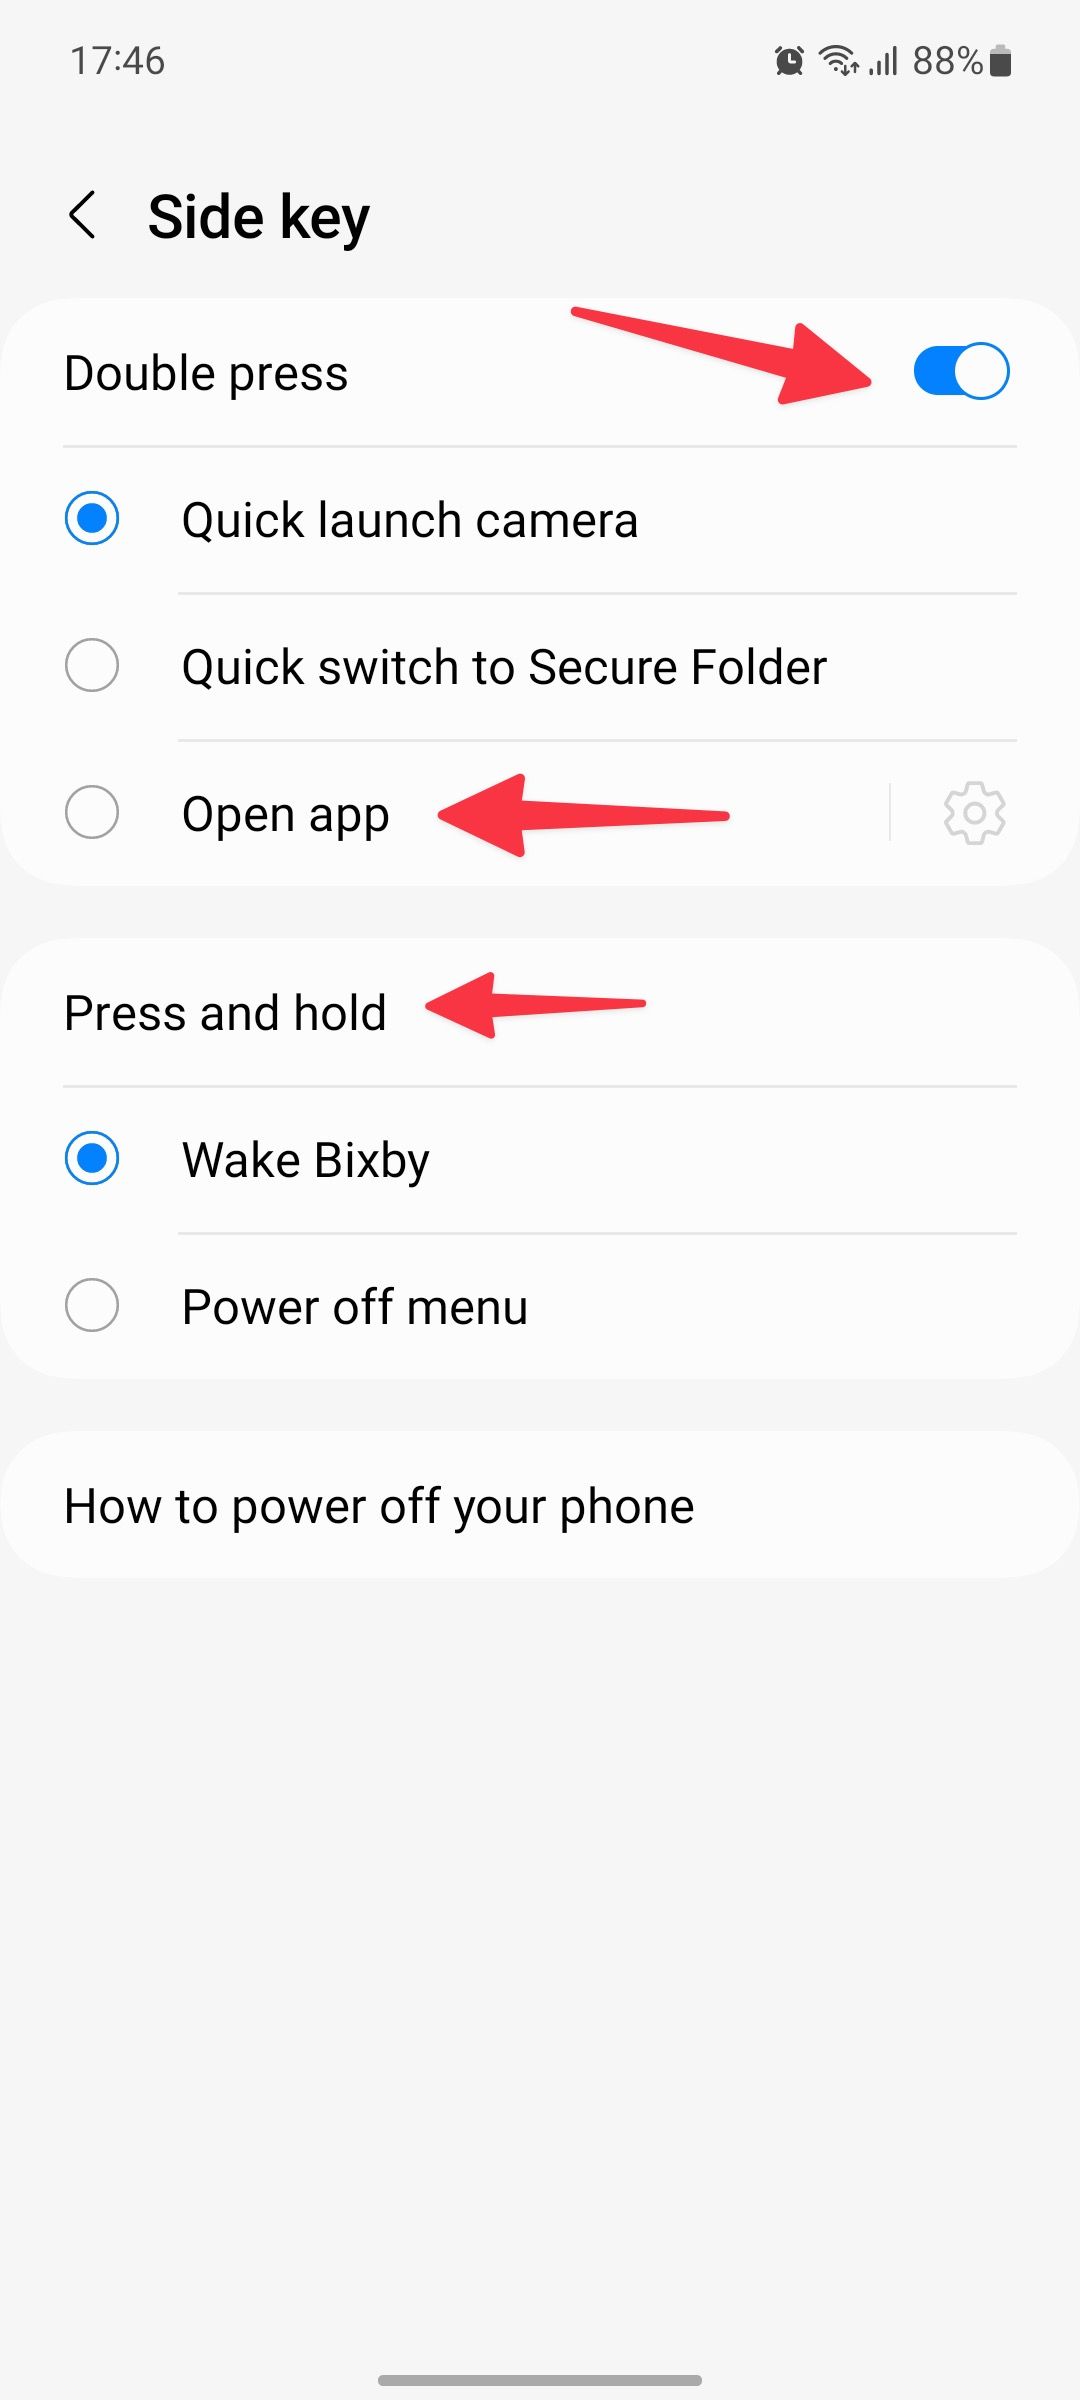 Navigate the side key settings in the Settings app on a Samsung phone to change its functions.